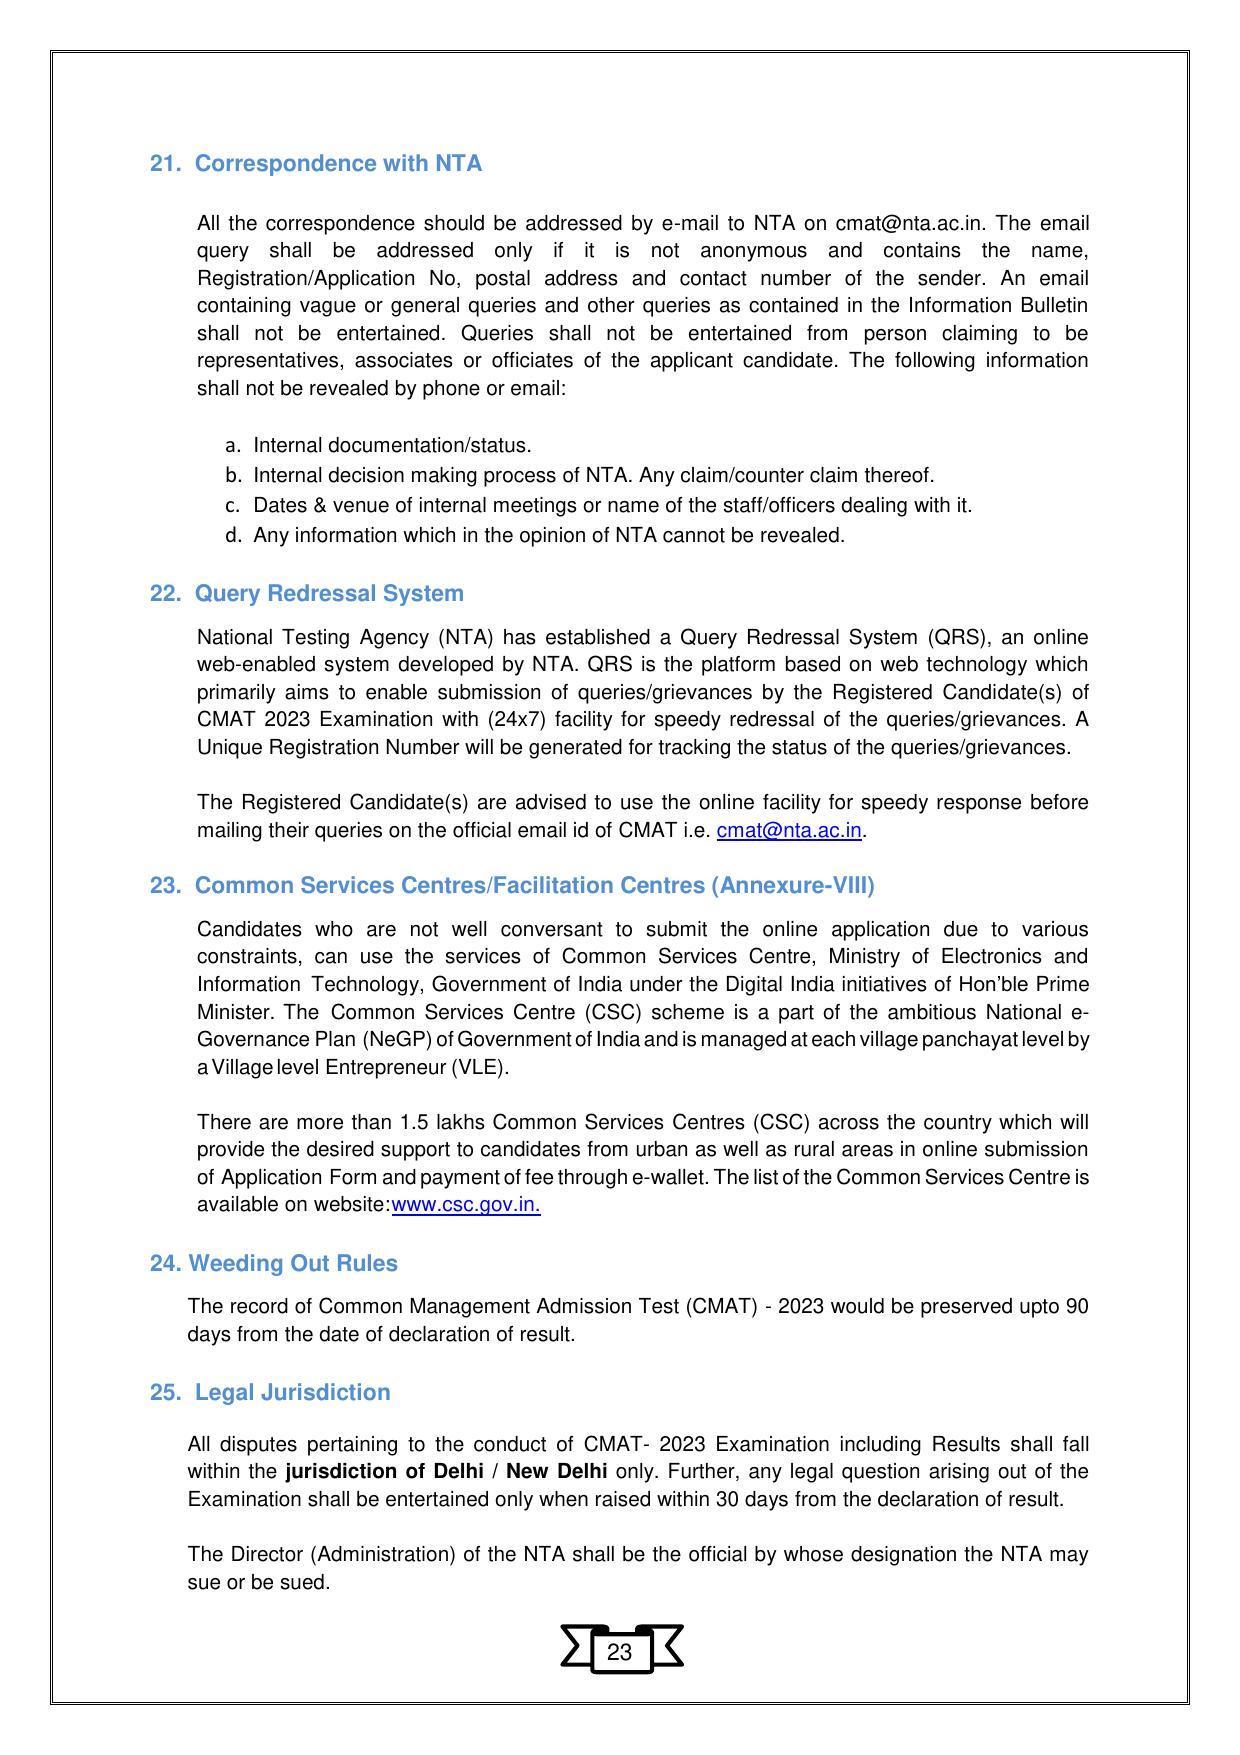 CMAT 2023 Information Bulletin - Page 26